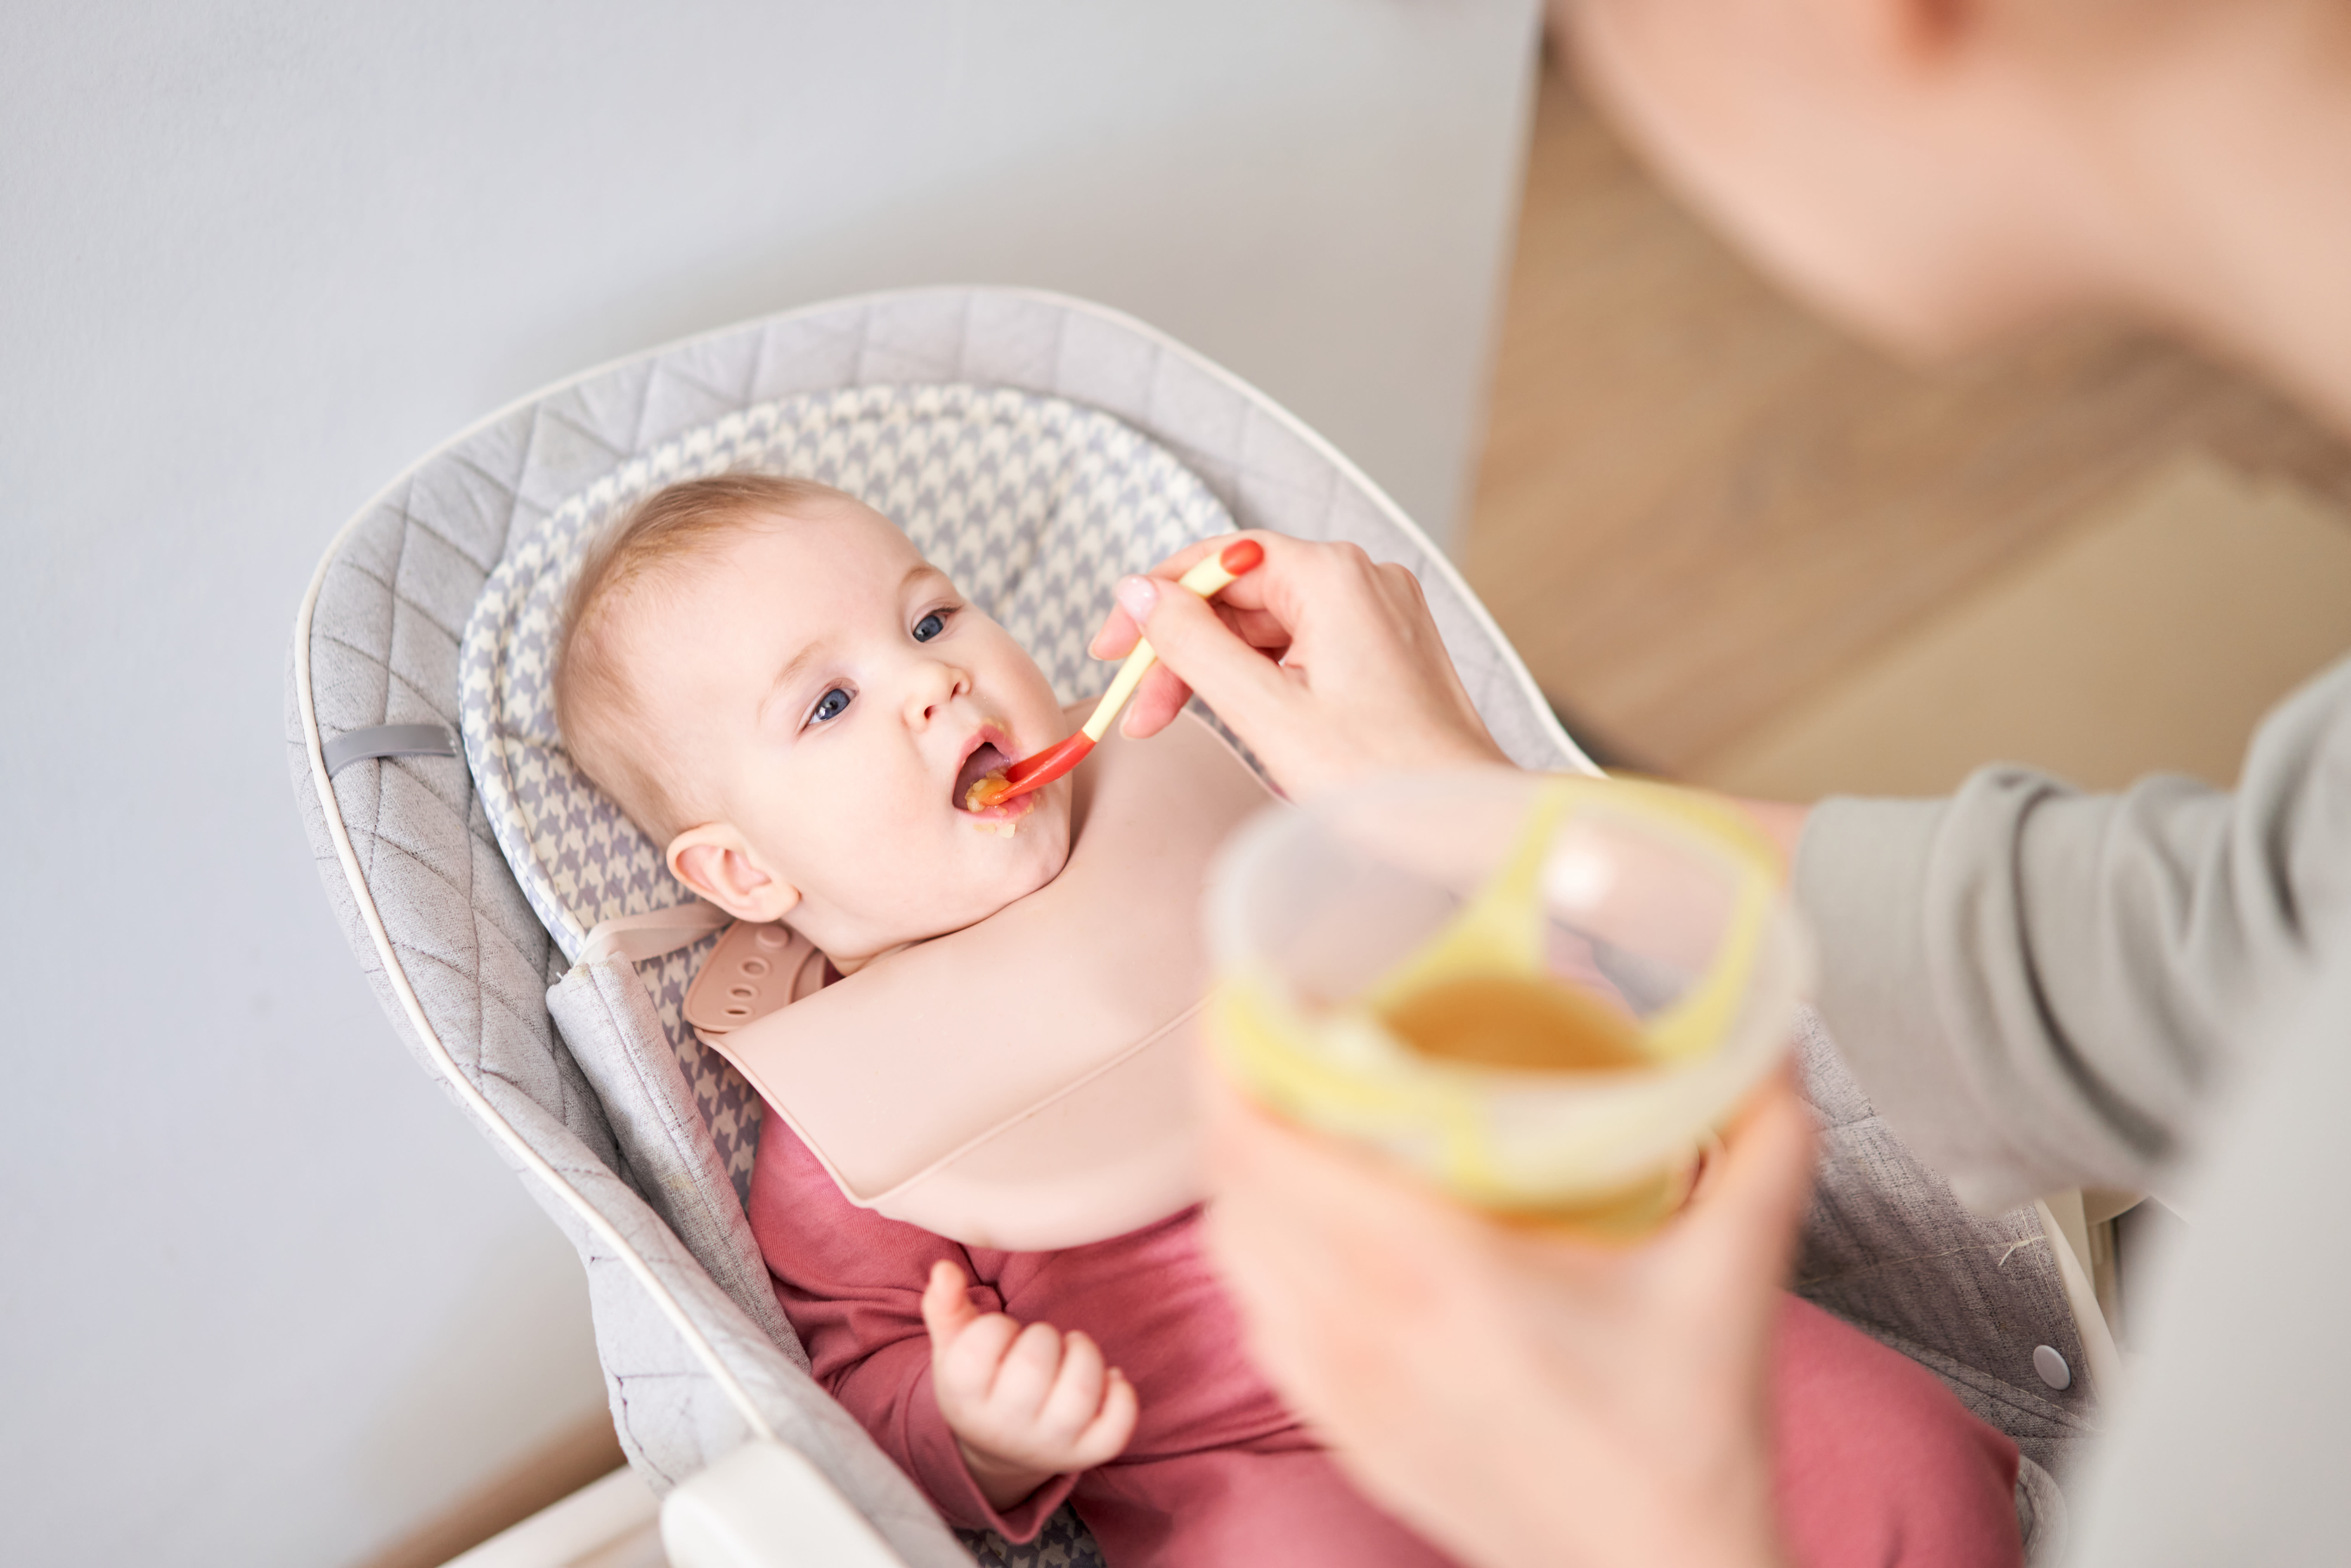 Lawmakers introduce bill to limit heavy metals in baby food